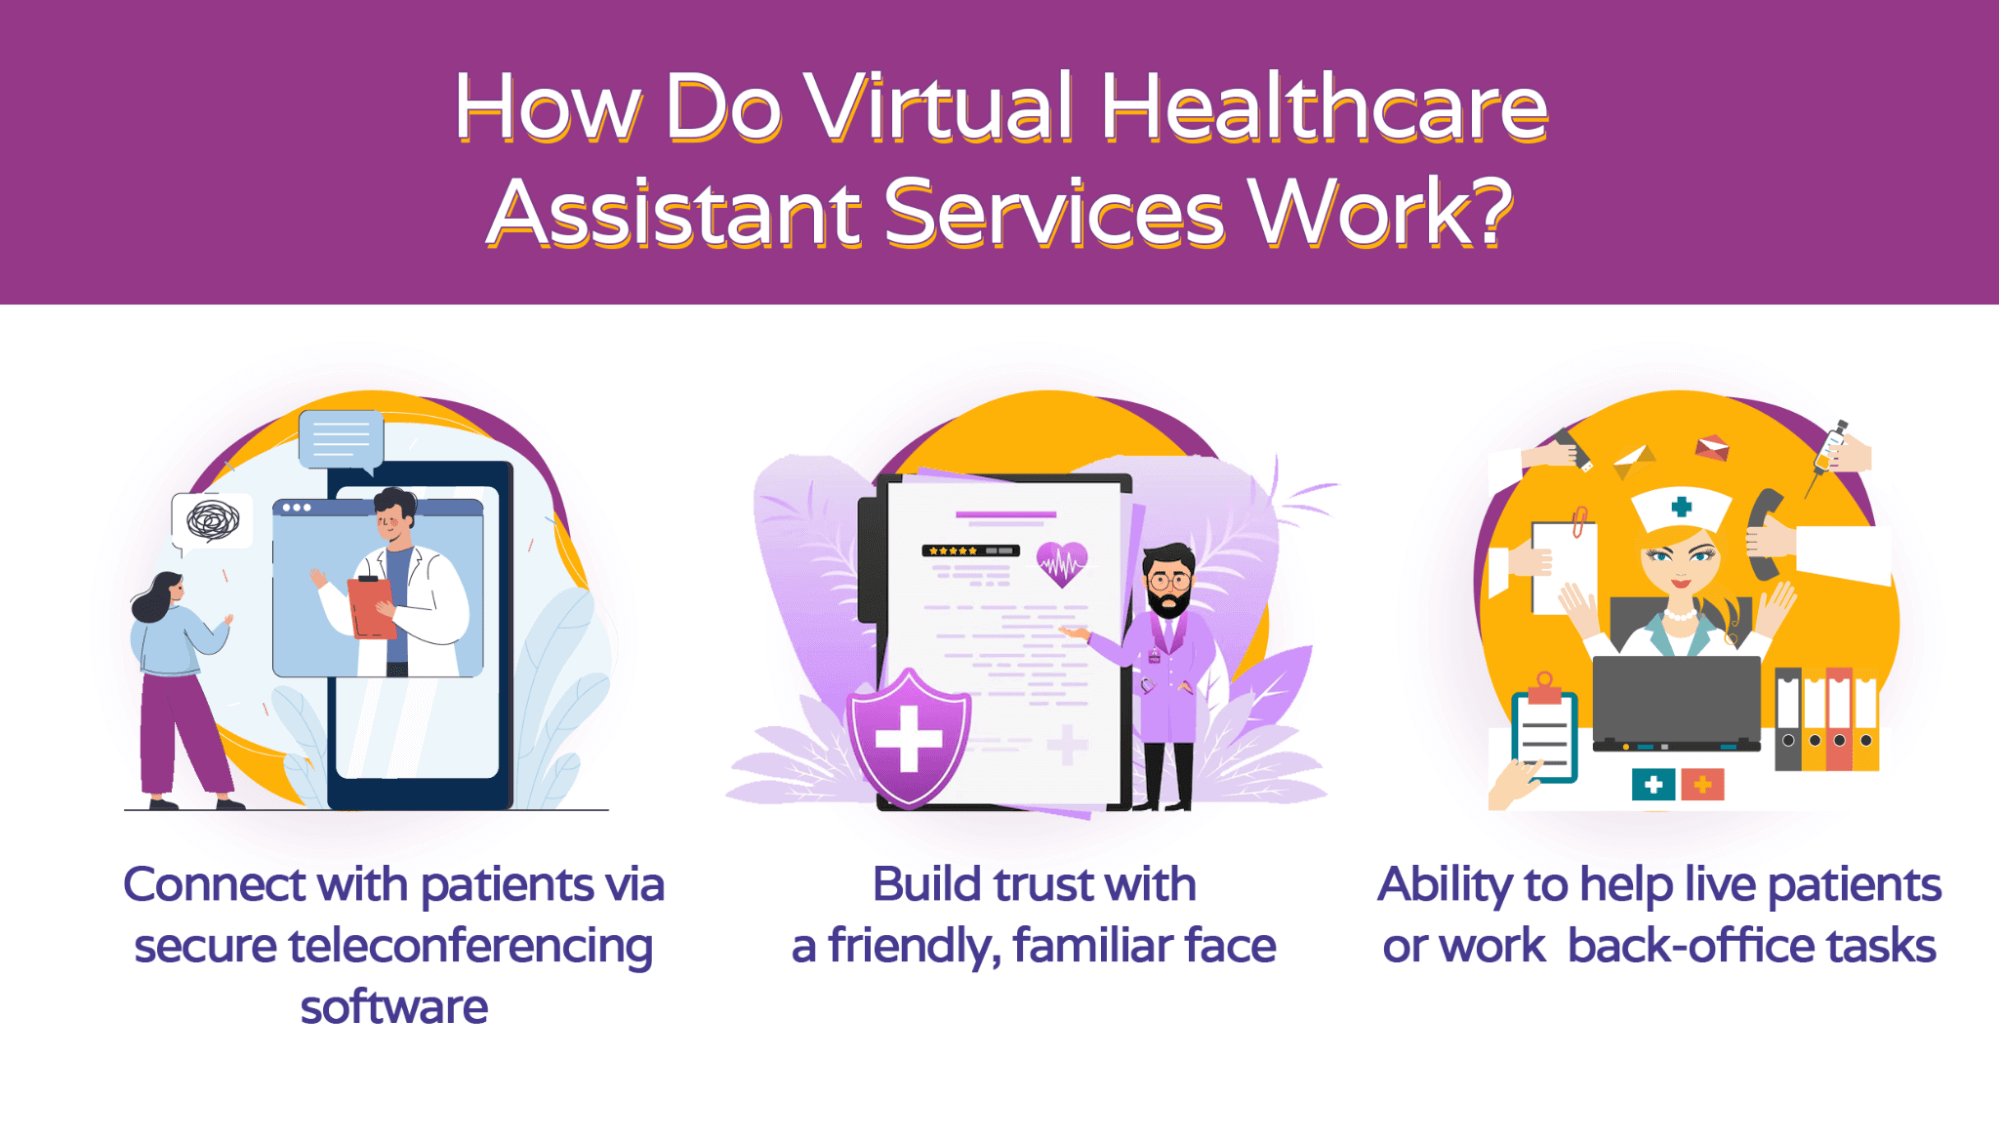 Learn the facts on virtual healthcare assistants